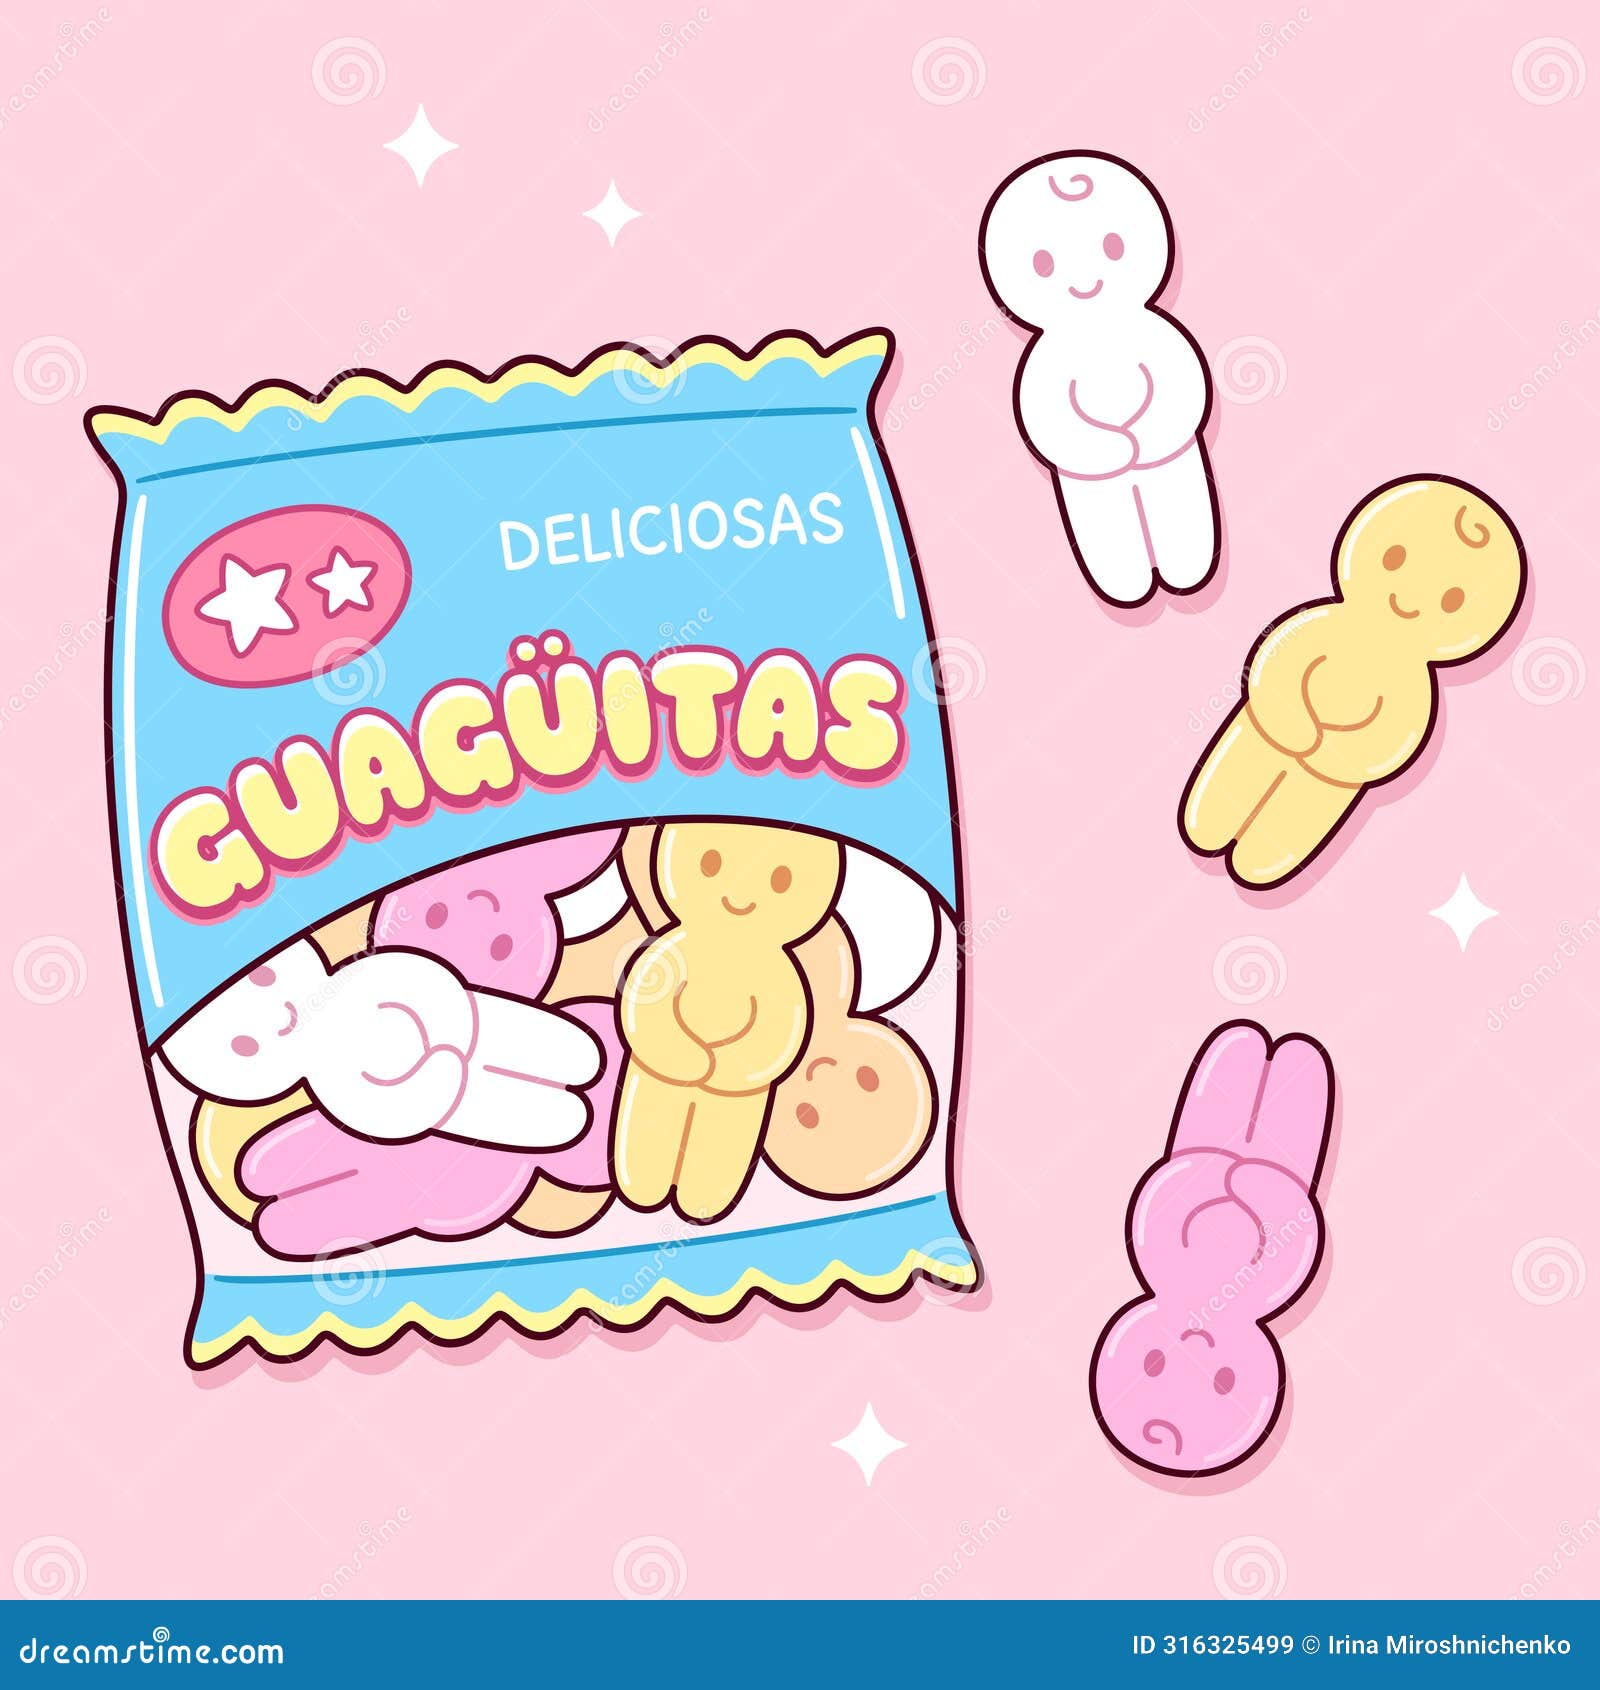 guaguitas chilean marshmallow candy